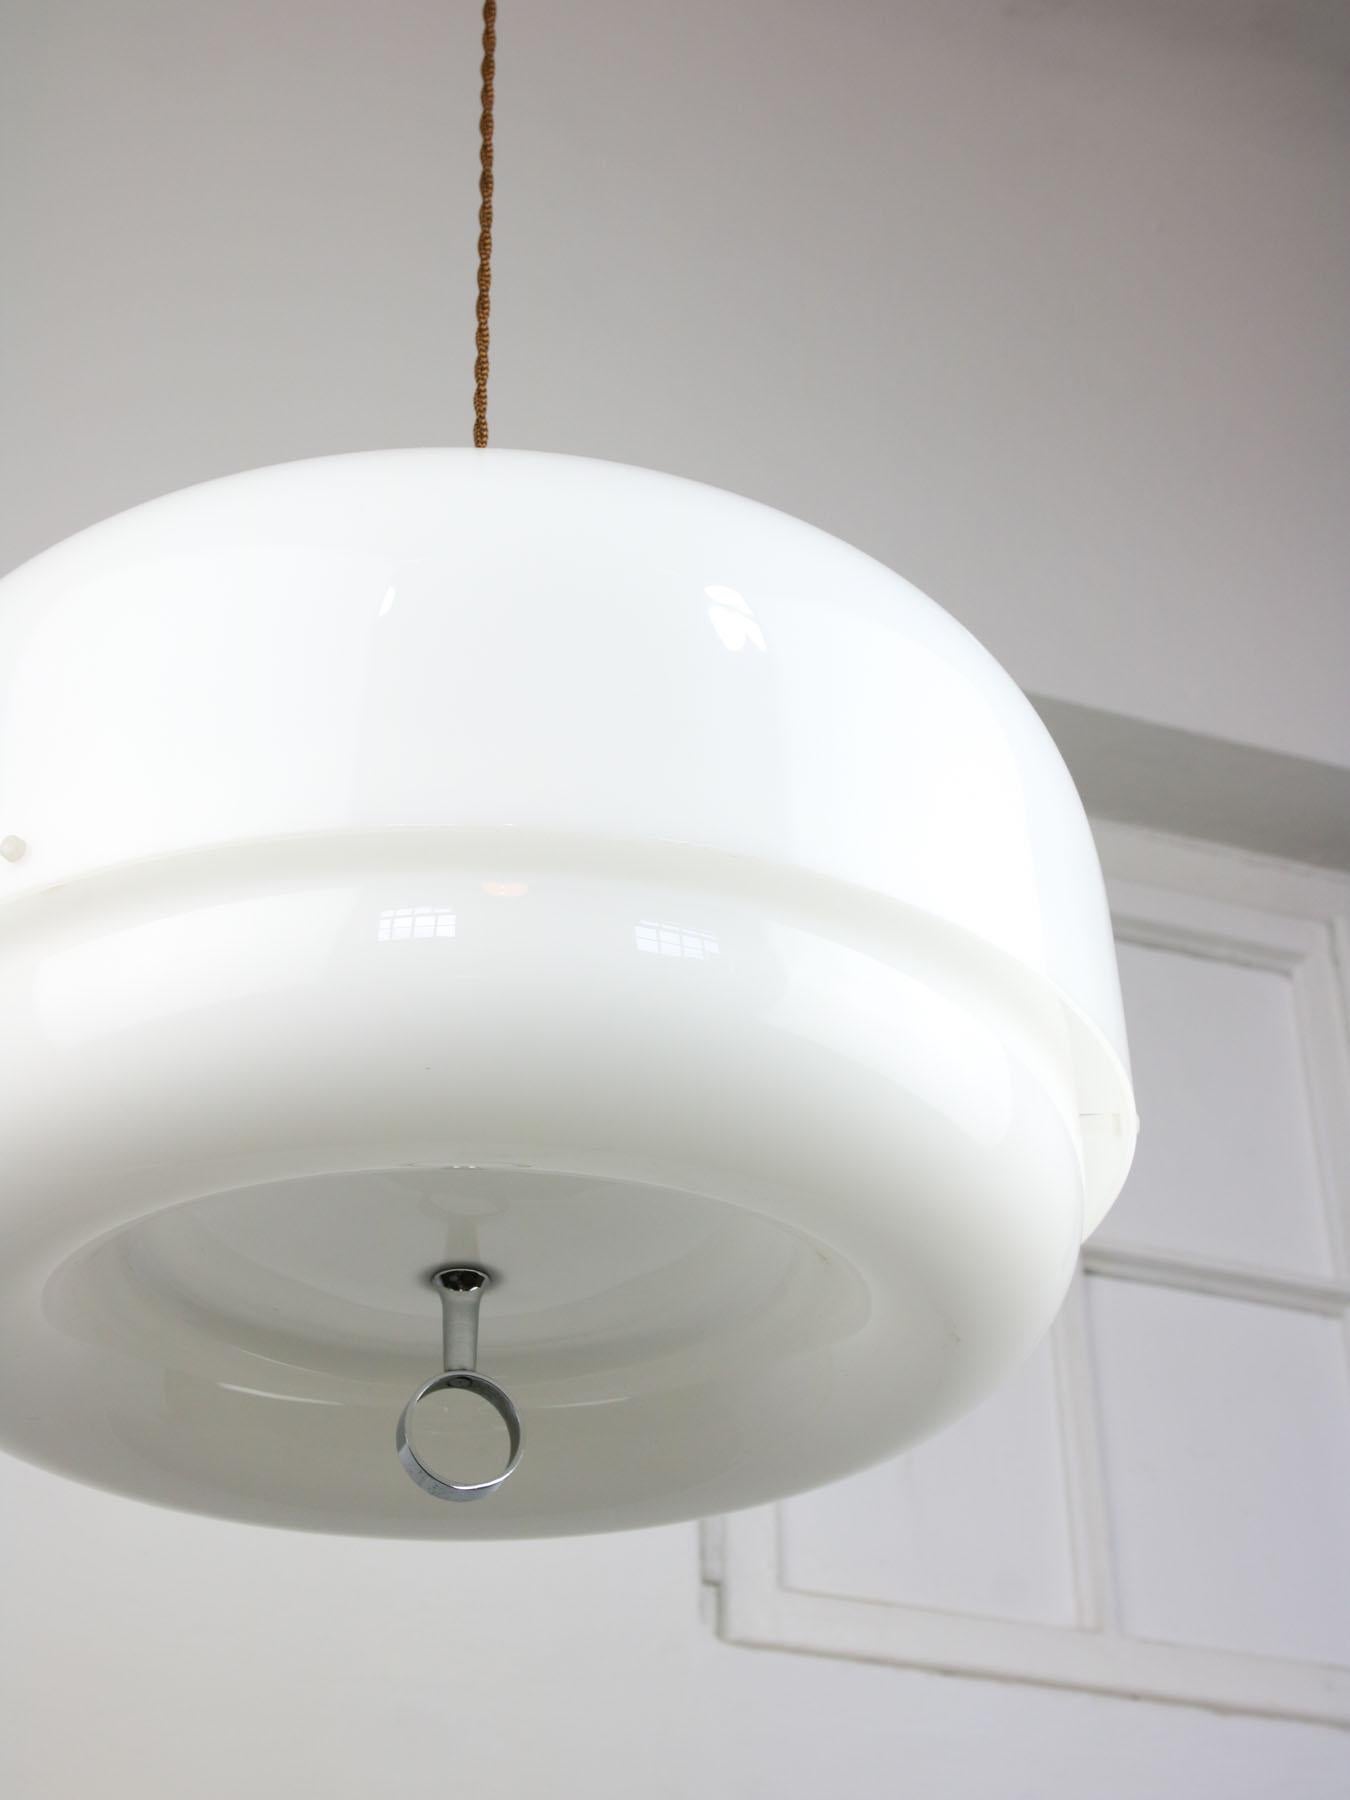 Rare large version of Medusa lamp (45cm diameter vs standard 35cm).

The lamp socket is designed for standard E27 light-bulb (not included) but also takes your standard American/Canadian E26 size (tested). Works with 220v as well as